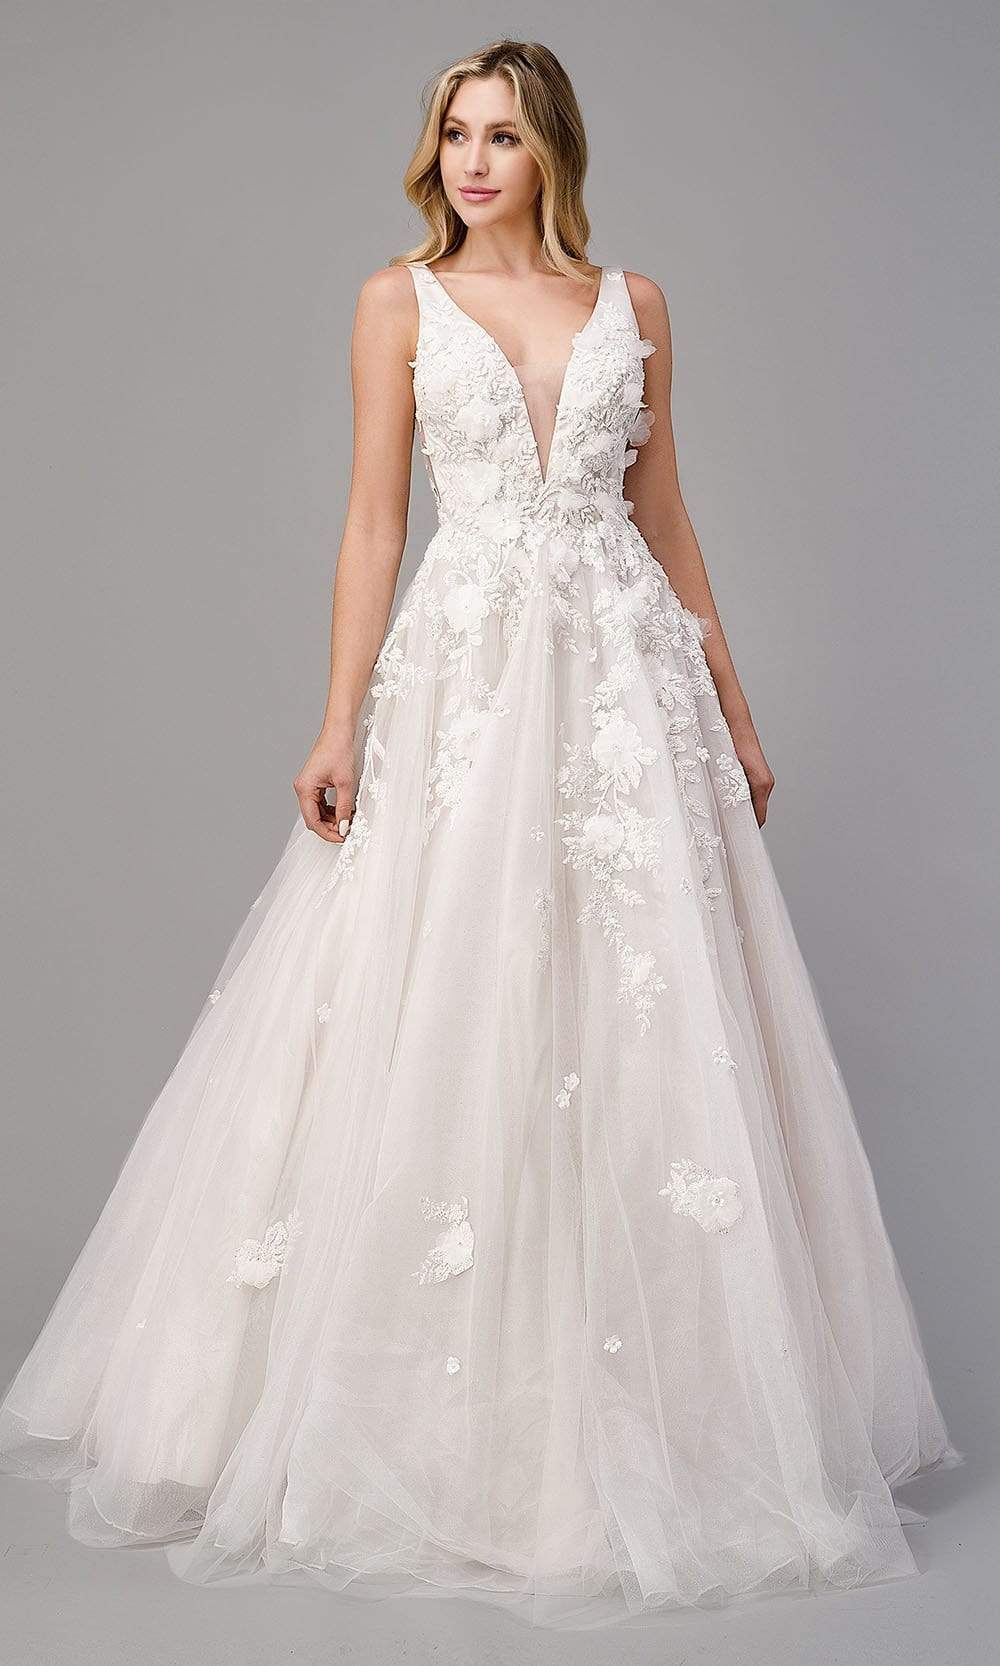 Andrea and Leo - A1028W Plunging Neck Floral Wedding Dress Wedding Dresses 2 / French White